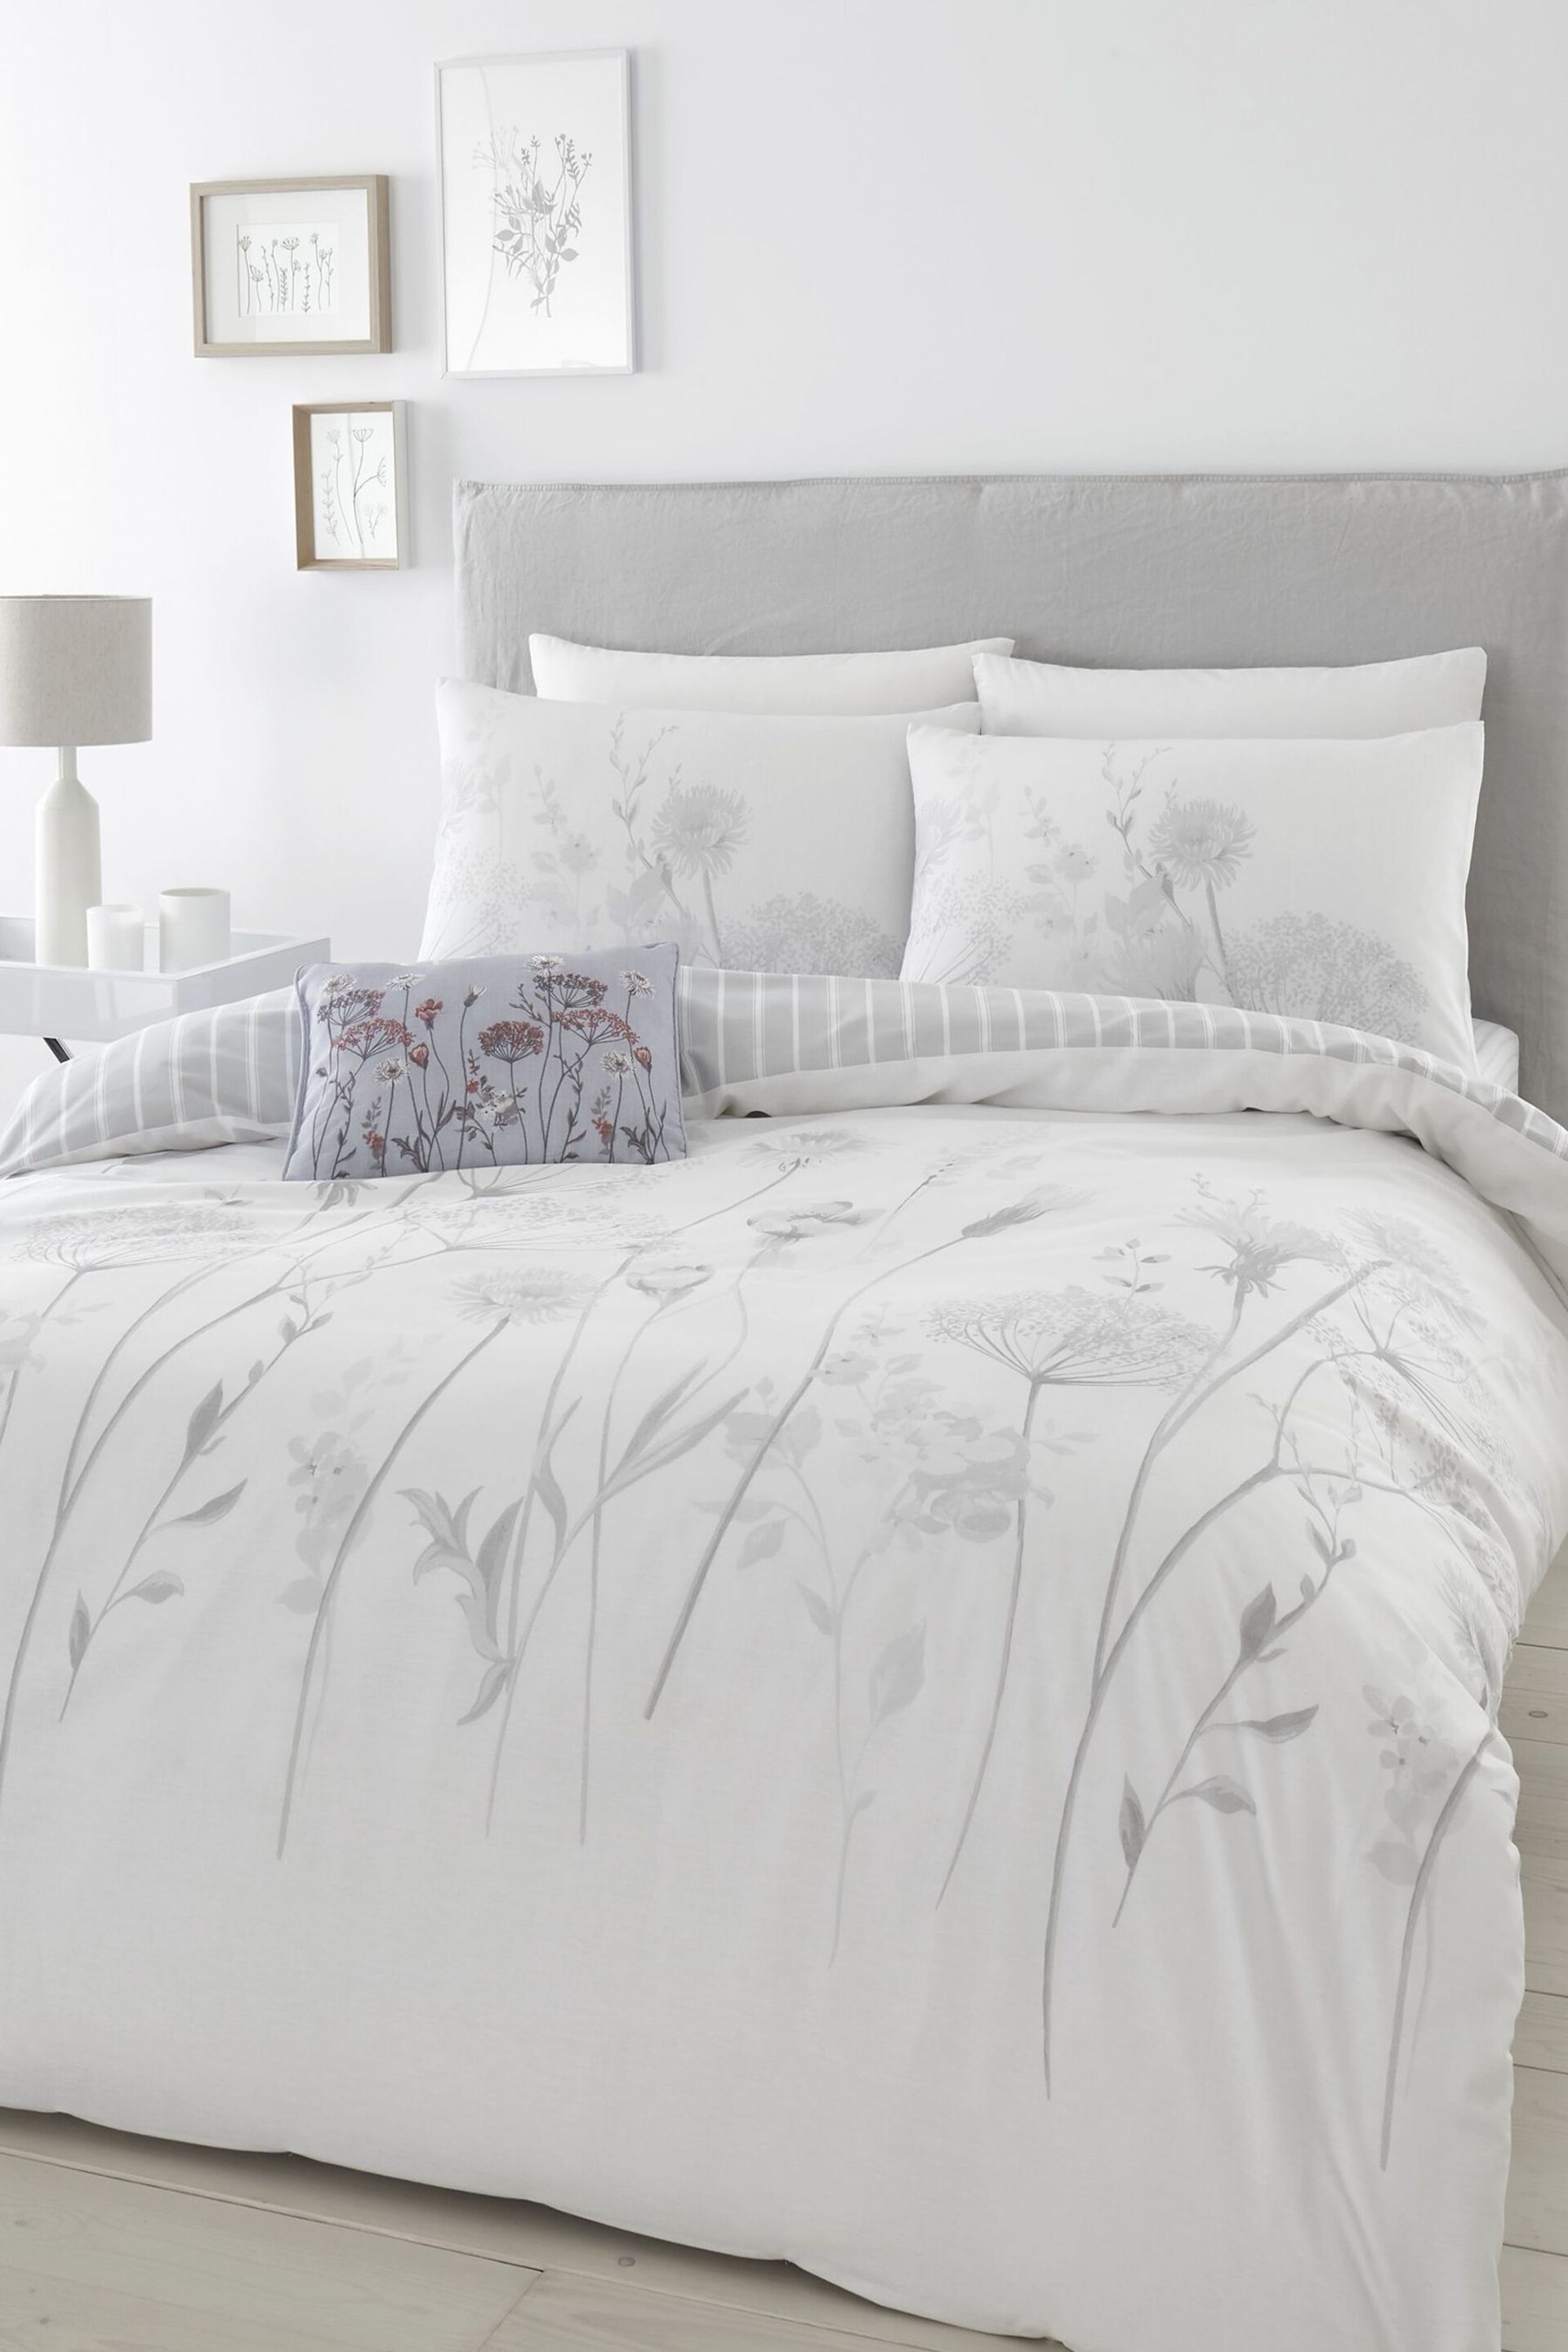 Catherine Lansfield Grey/White Meadowsweet Floral Reversible Duvet Cover Set - Image 1 of 1